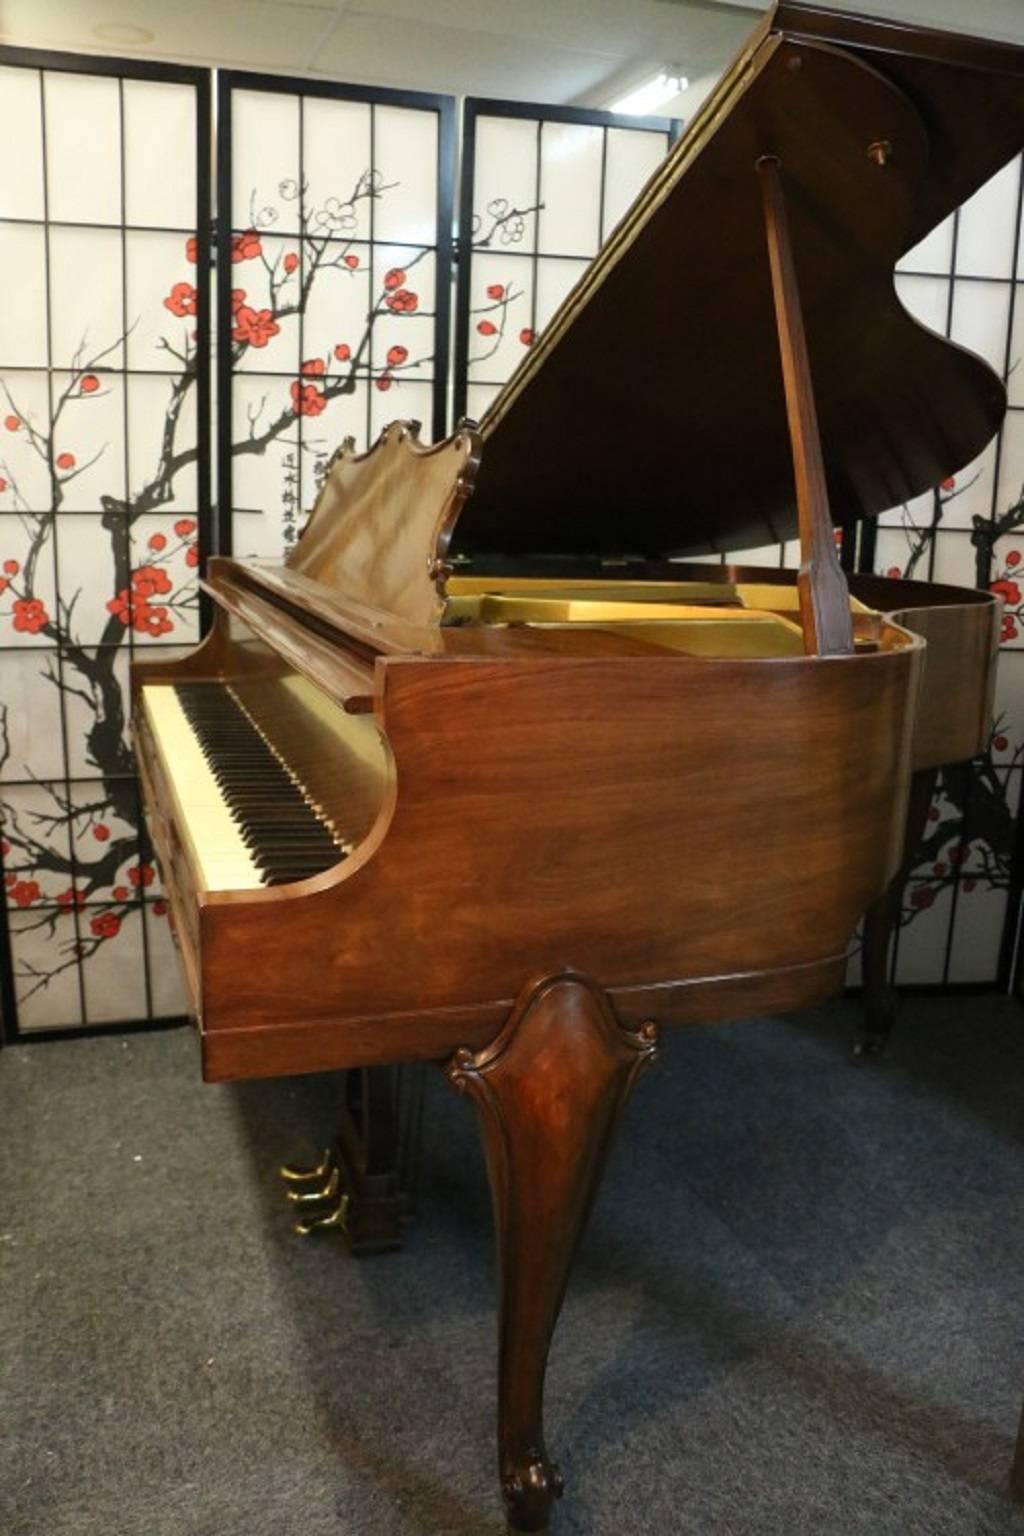 See and hear more about this magnificent piano on the video at the bottom of Sonny's Luxury Art case piano storefront homepage.

Pretty, elegant, "Heller" Le Petite Baby Grand 4'6" made by the Winter Piano Company beautiful walnut,